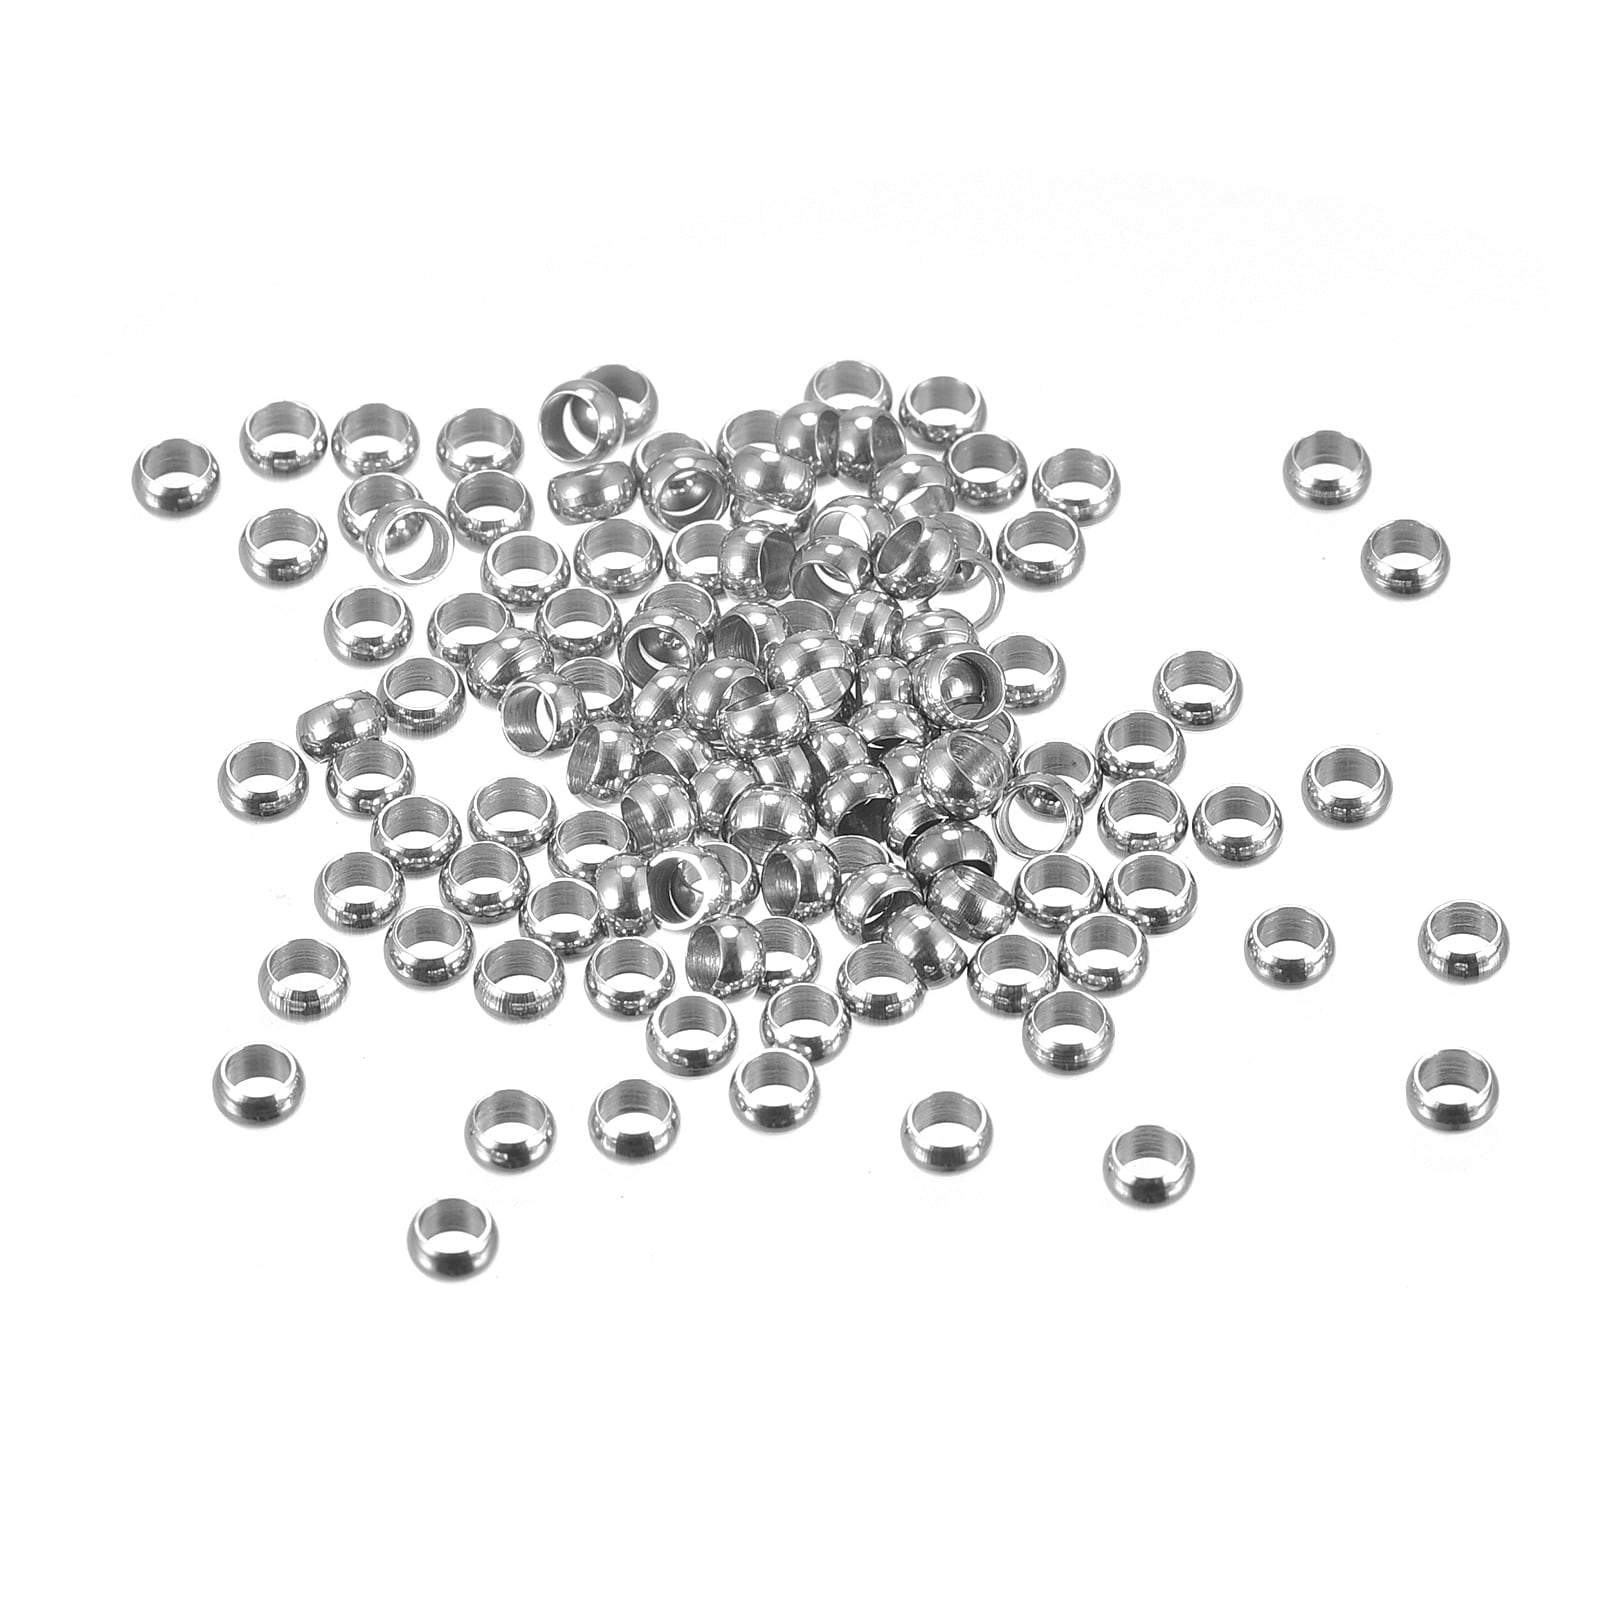 360pcs 3mm Round Crimp Beads Jewelry Making Crimp End Spacer Bead, Silver - Silver Tone